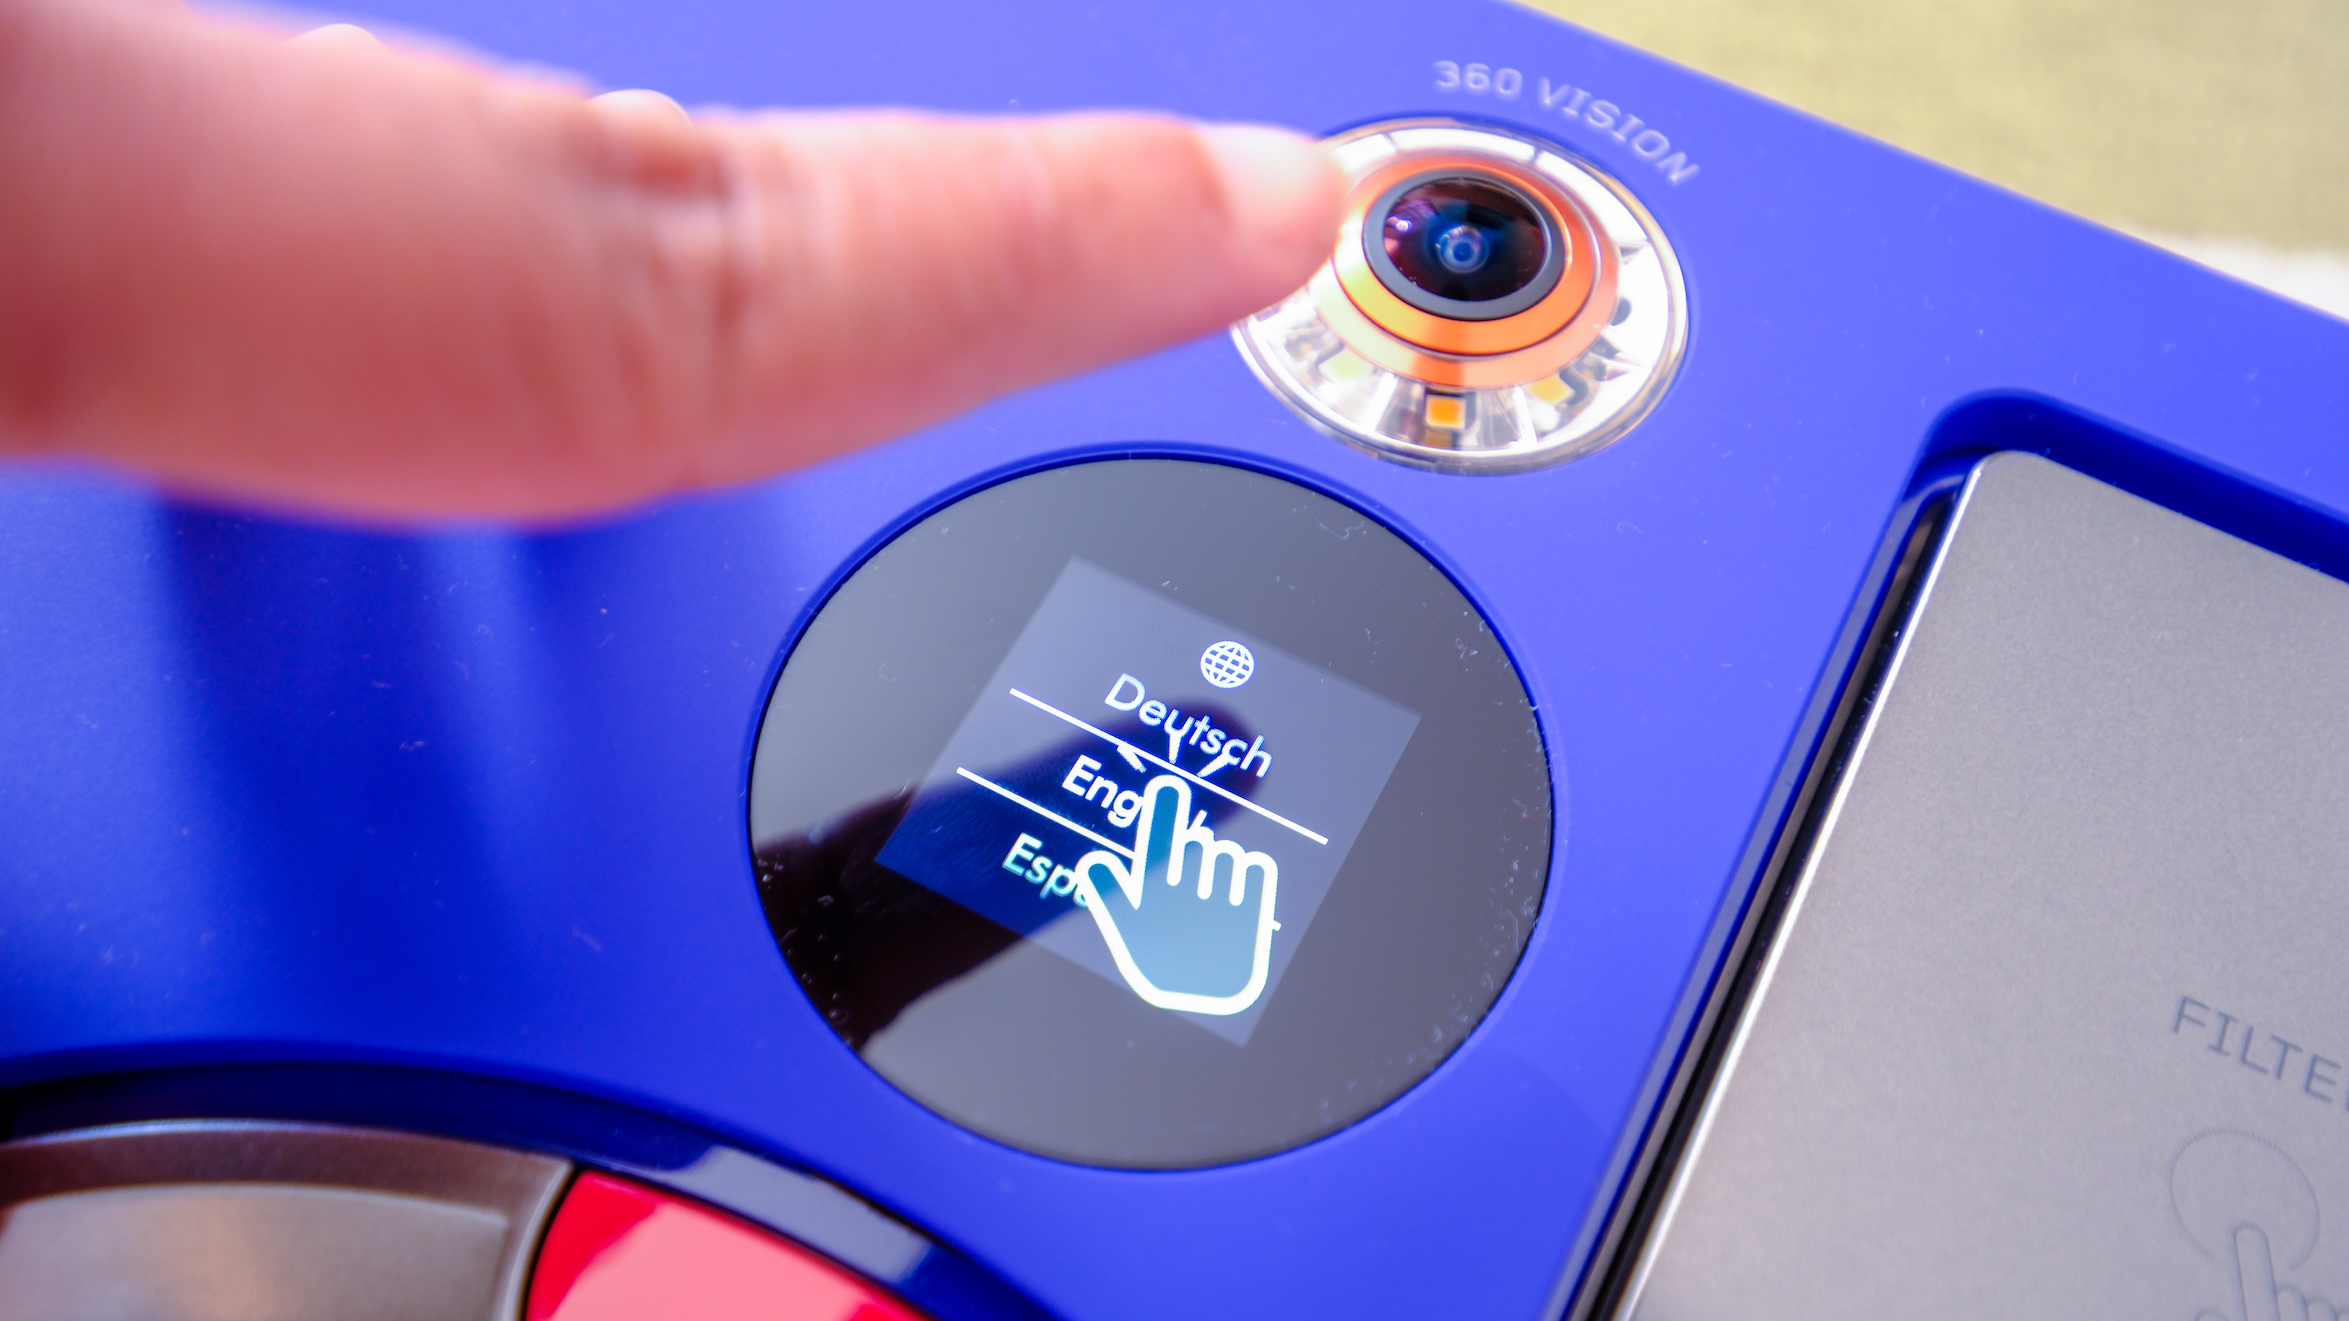 The touchscreen is basically a button you can press on the Dyson 360 Vis Nav